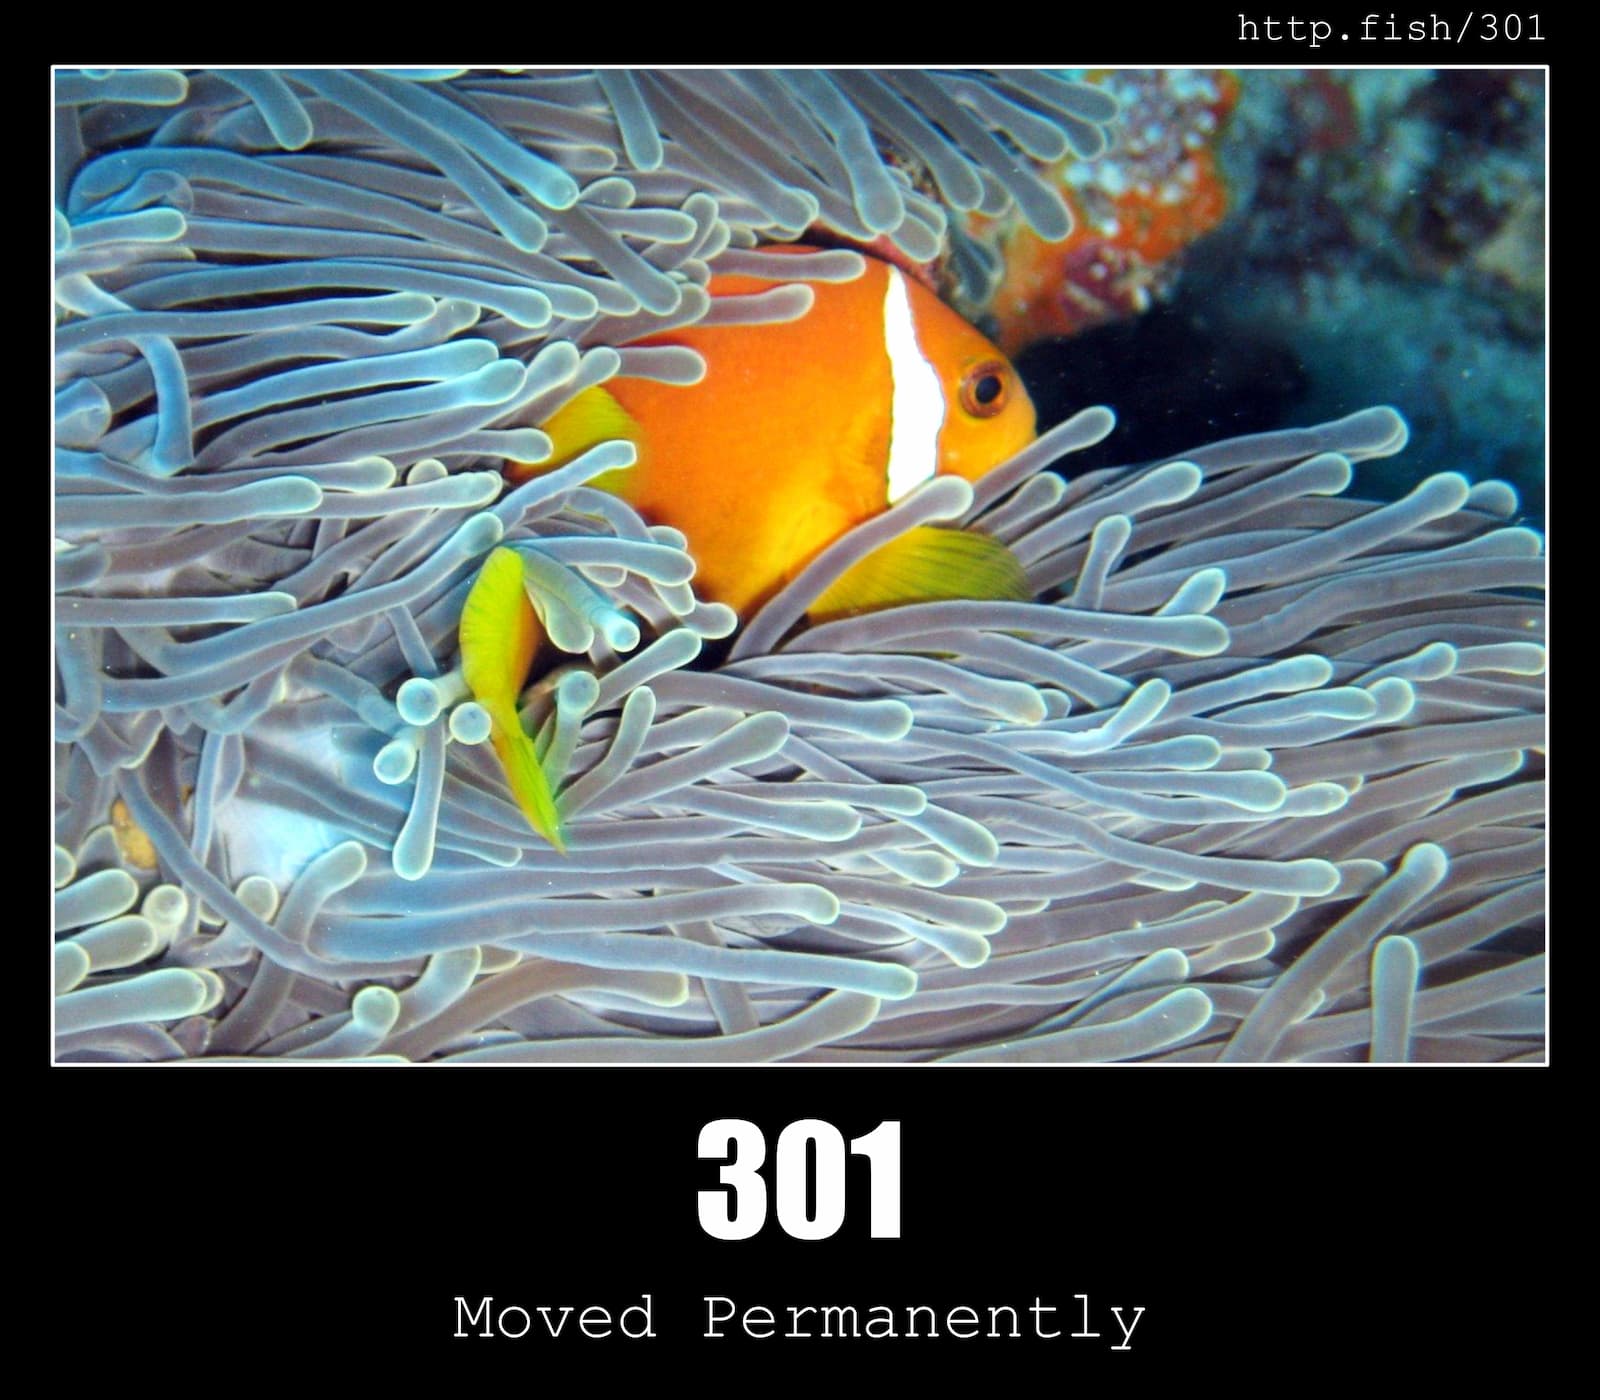 HTTP Status Code 301 Moved Permanently & Fish